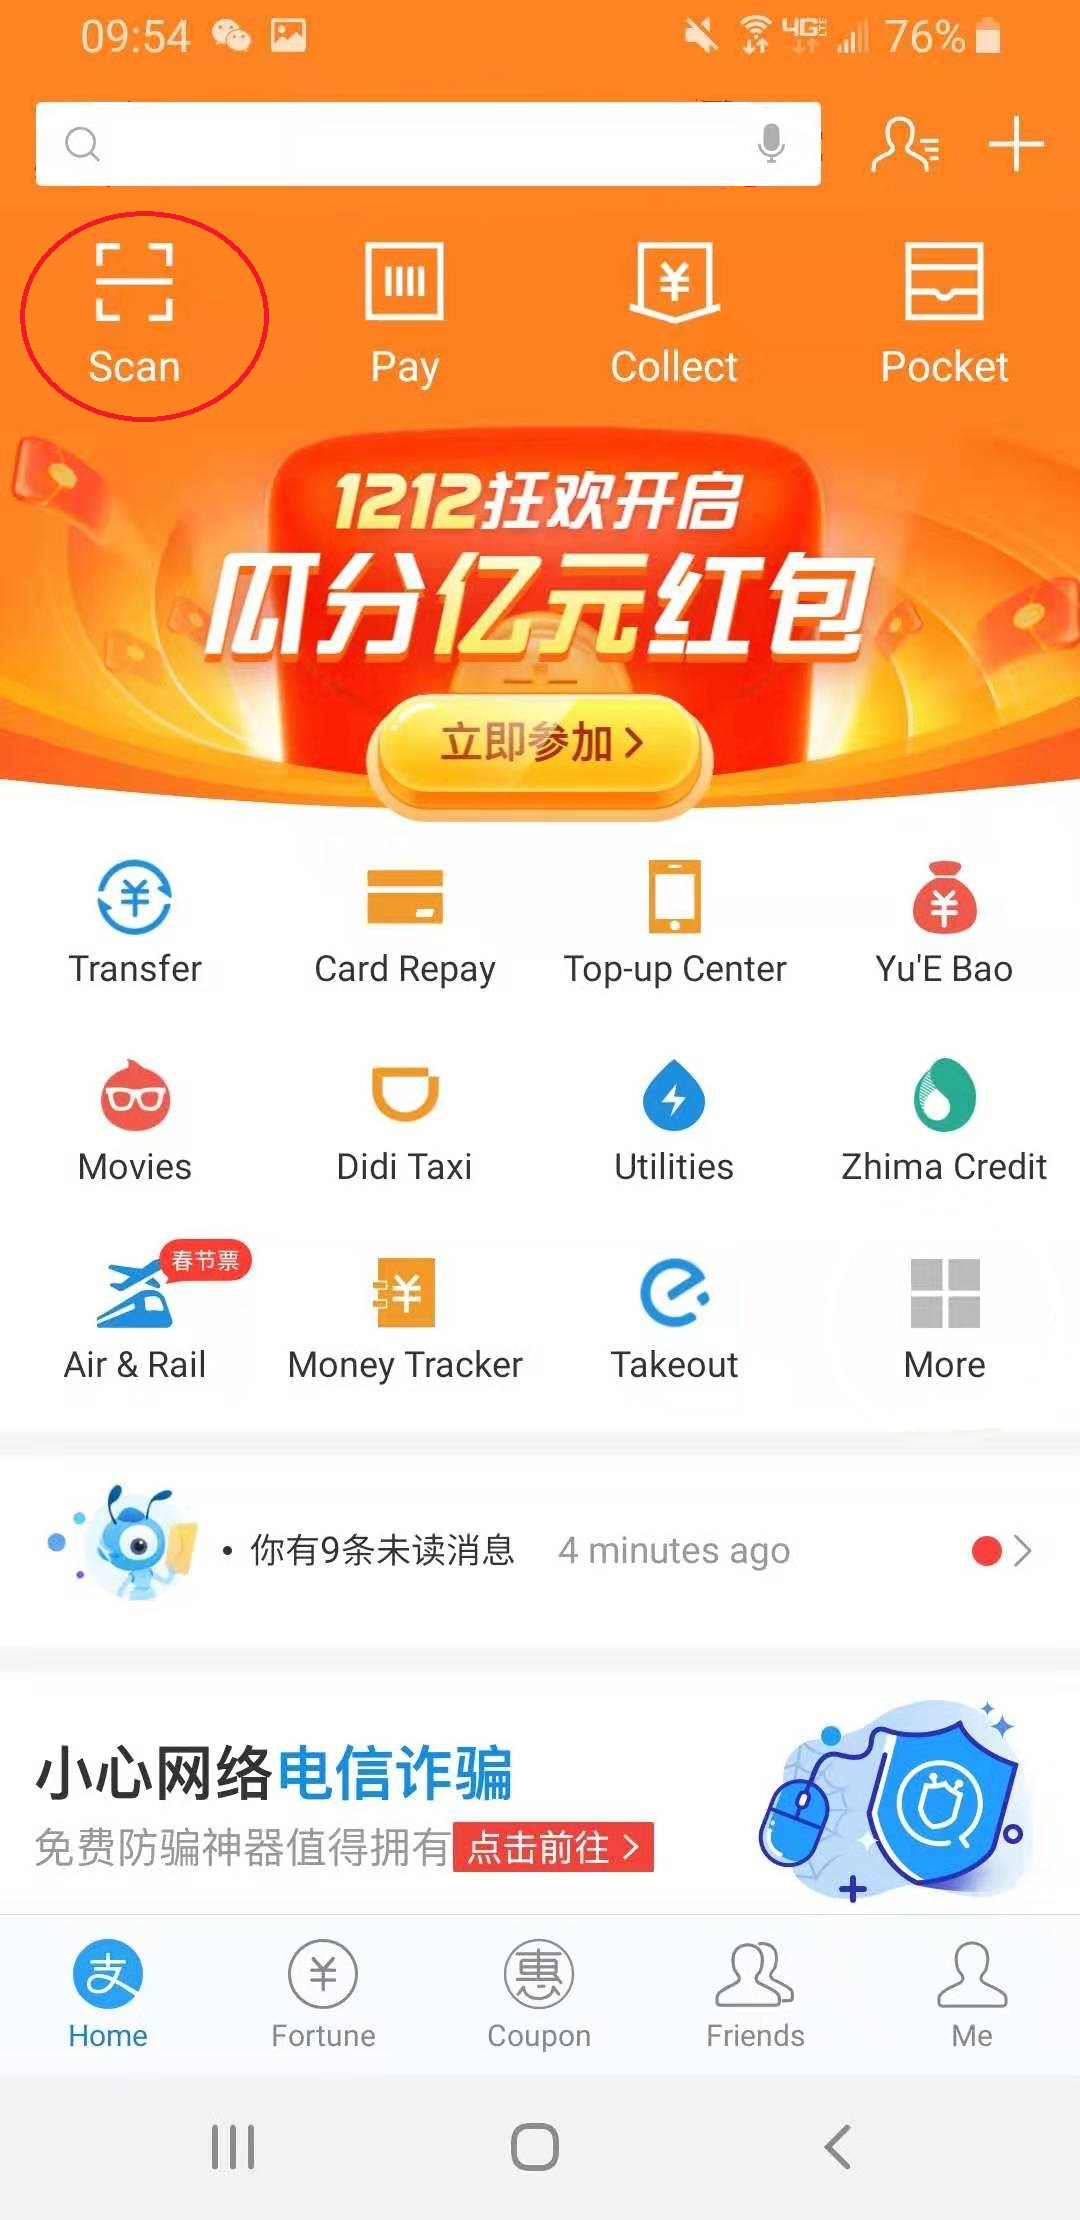 Alipay scan to pay